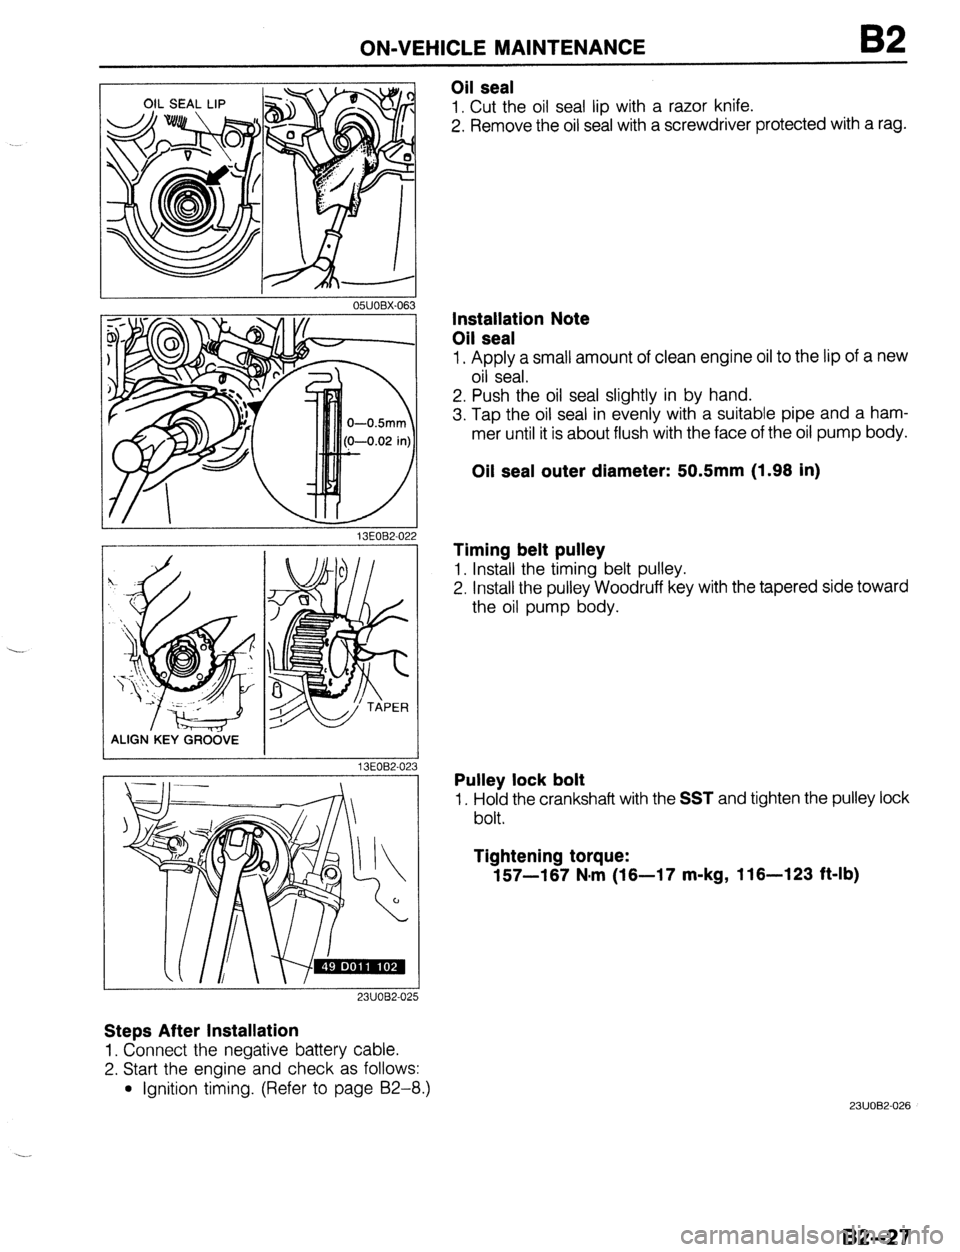 MAZDA PROTEGE 1992  Workshop Manual ON-VEHICLE MAINTENANCE 
I 05UOBX-063 
Oil seal 
1. Cut the oil seal lip with a razor knife. 
2. Remove the oil seal with a screwdriver protected with a rag. 
13EOB2-02 
ALIGN.KEY GRCi&E 
13EOB2-02 
23